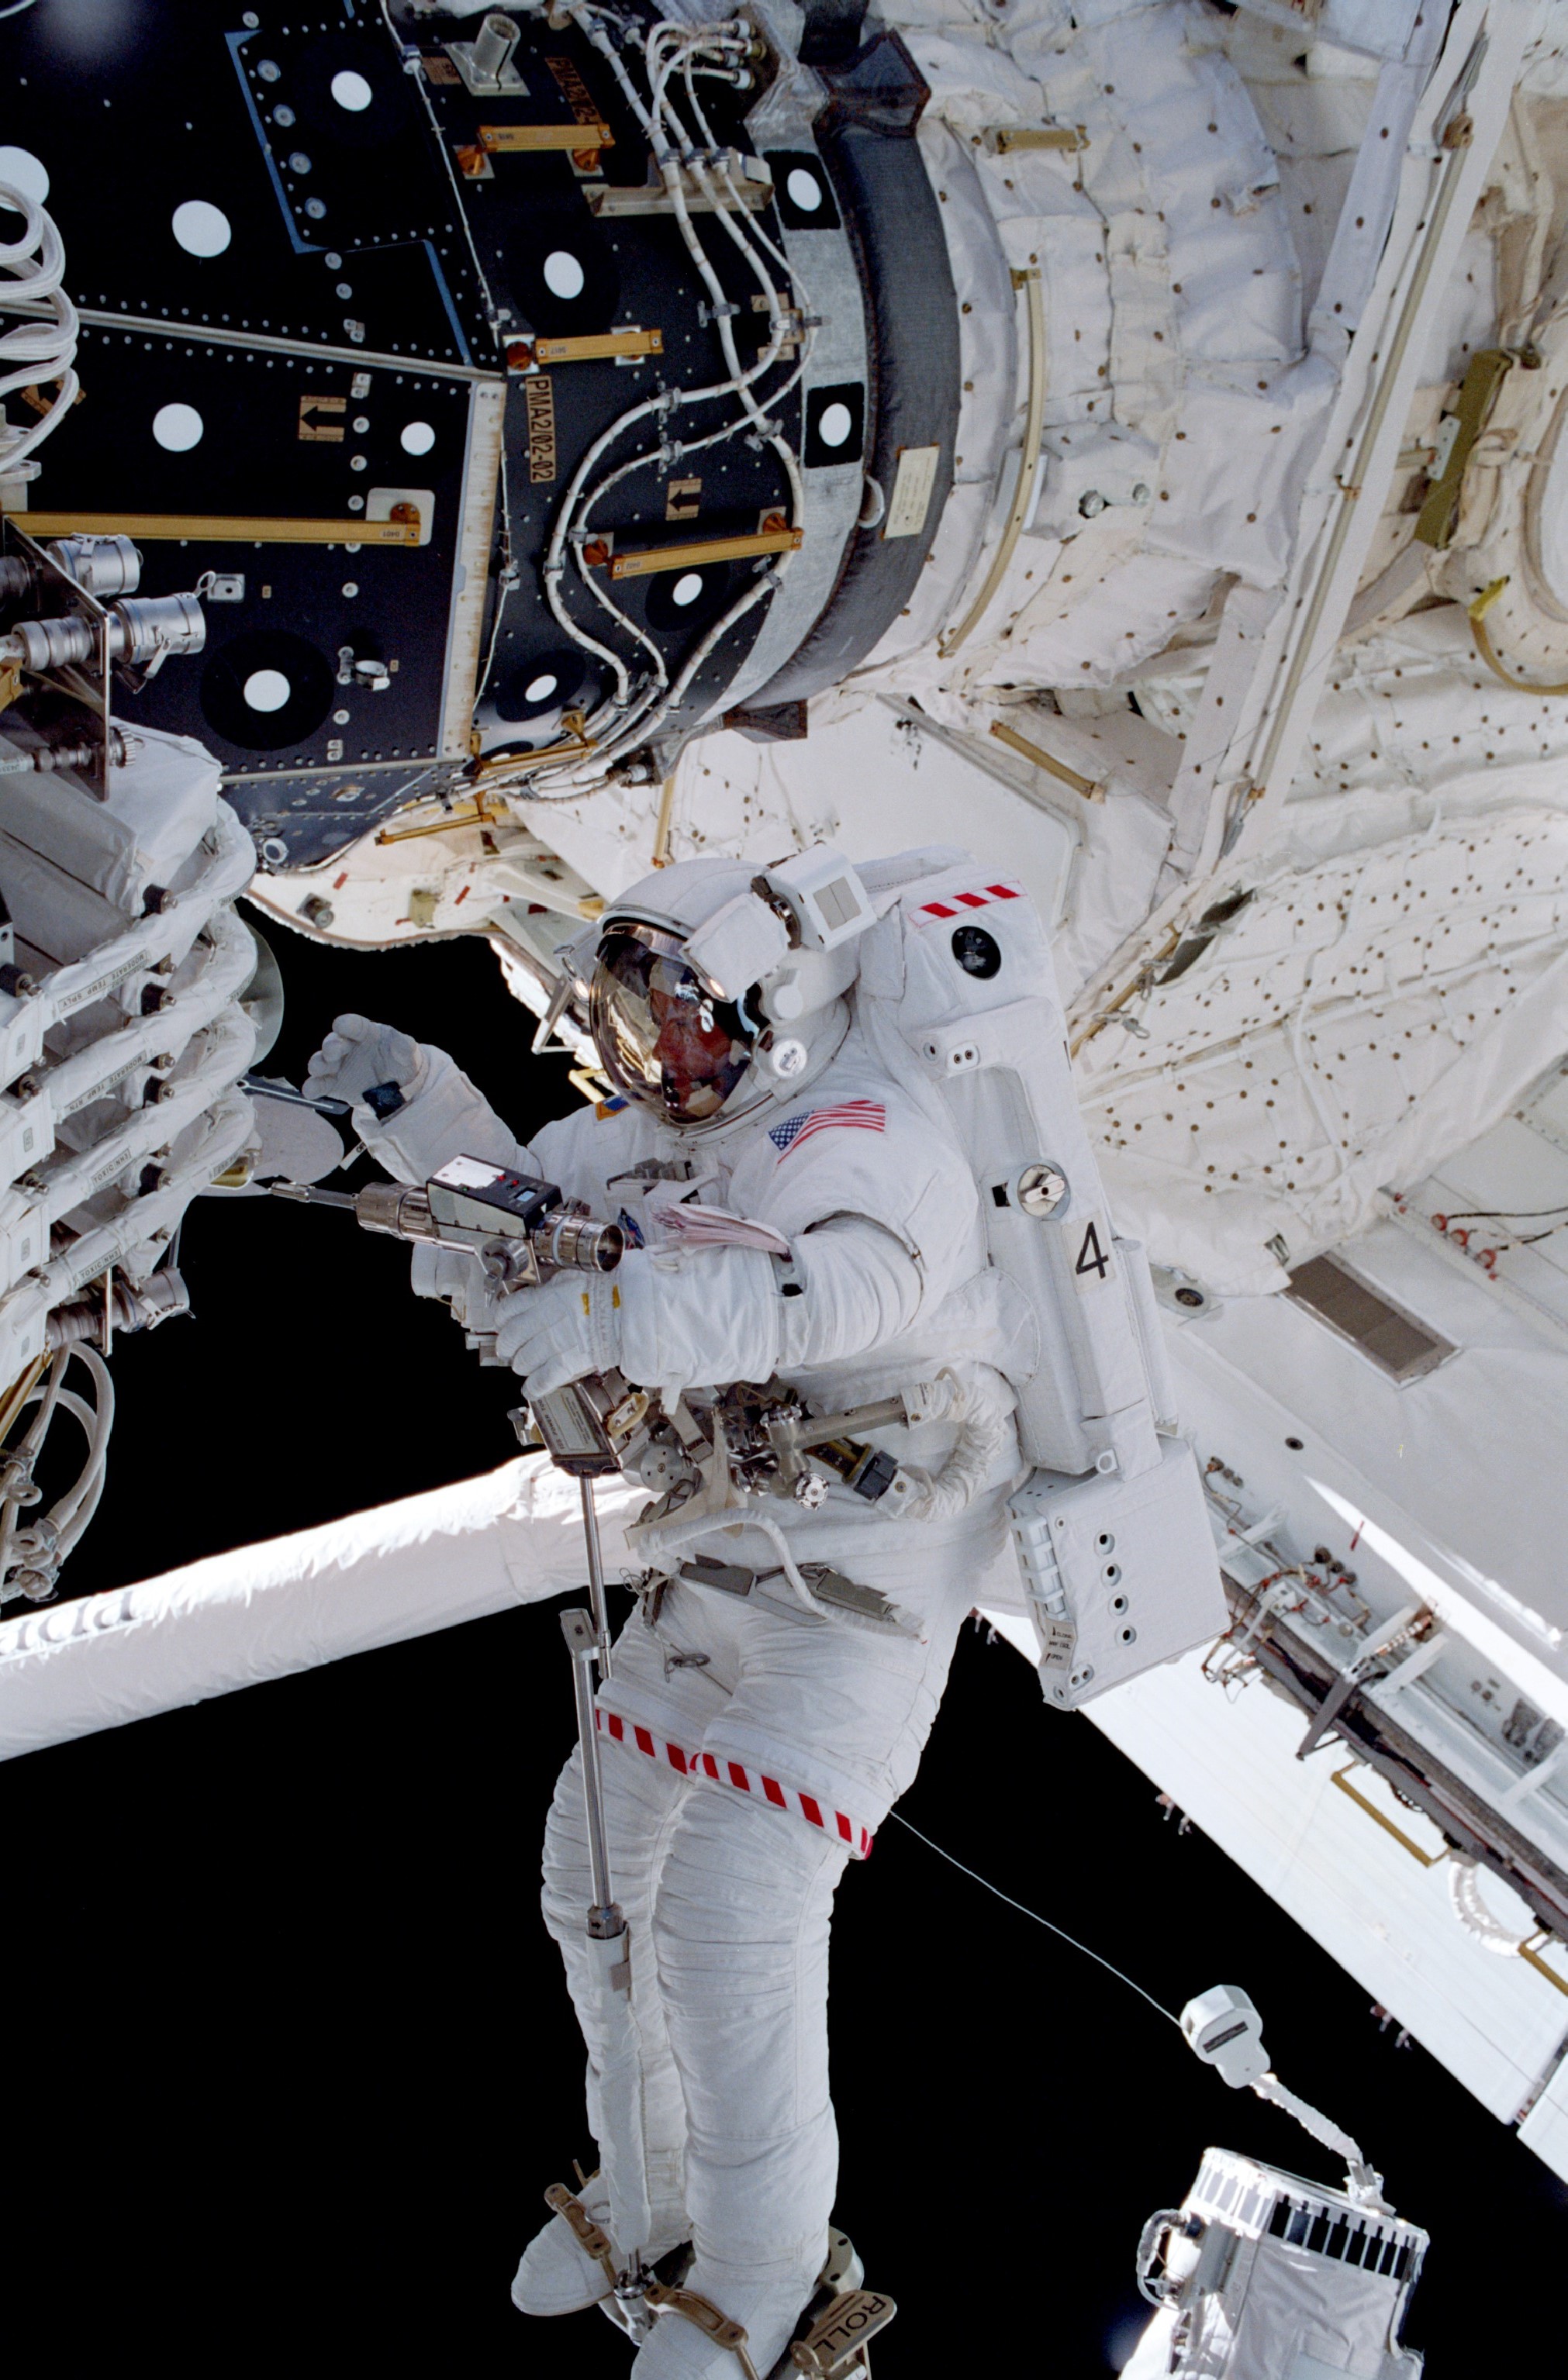 NASA astronaut Michael E. Lopez-Alegria working outside the space station during STS-92